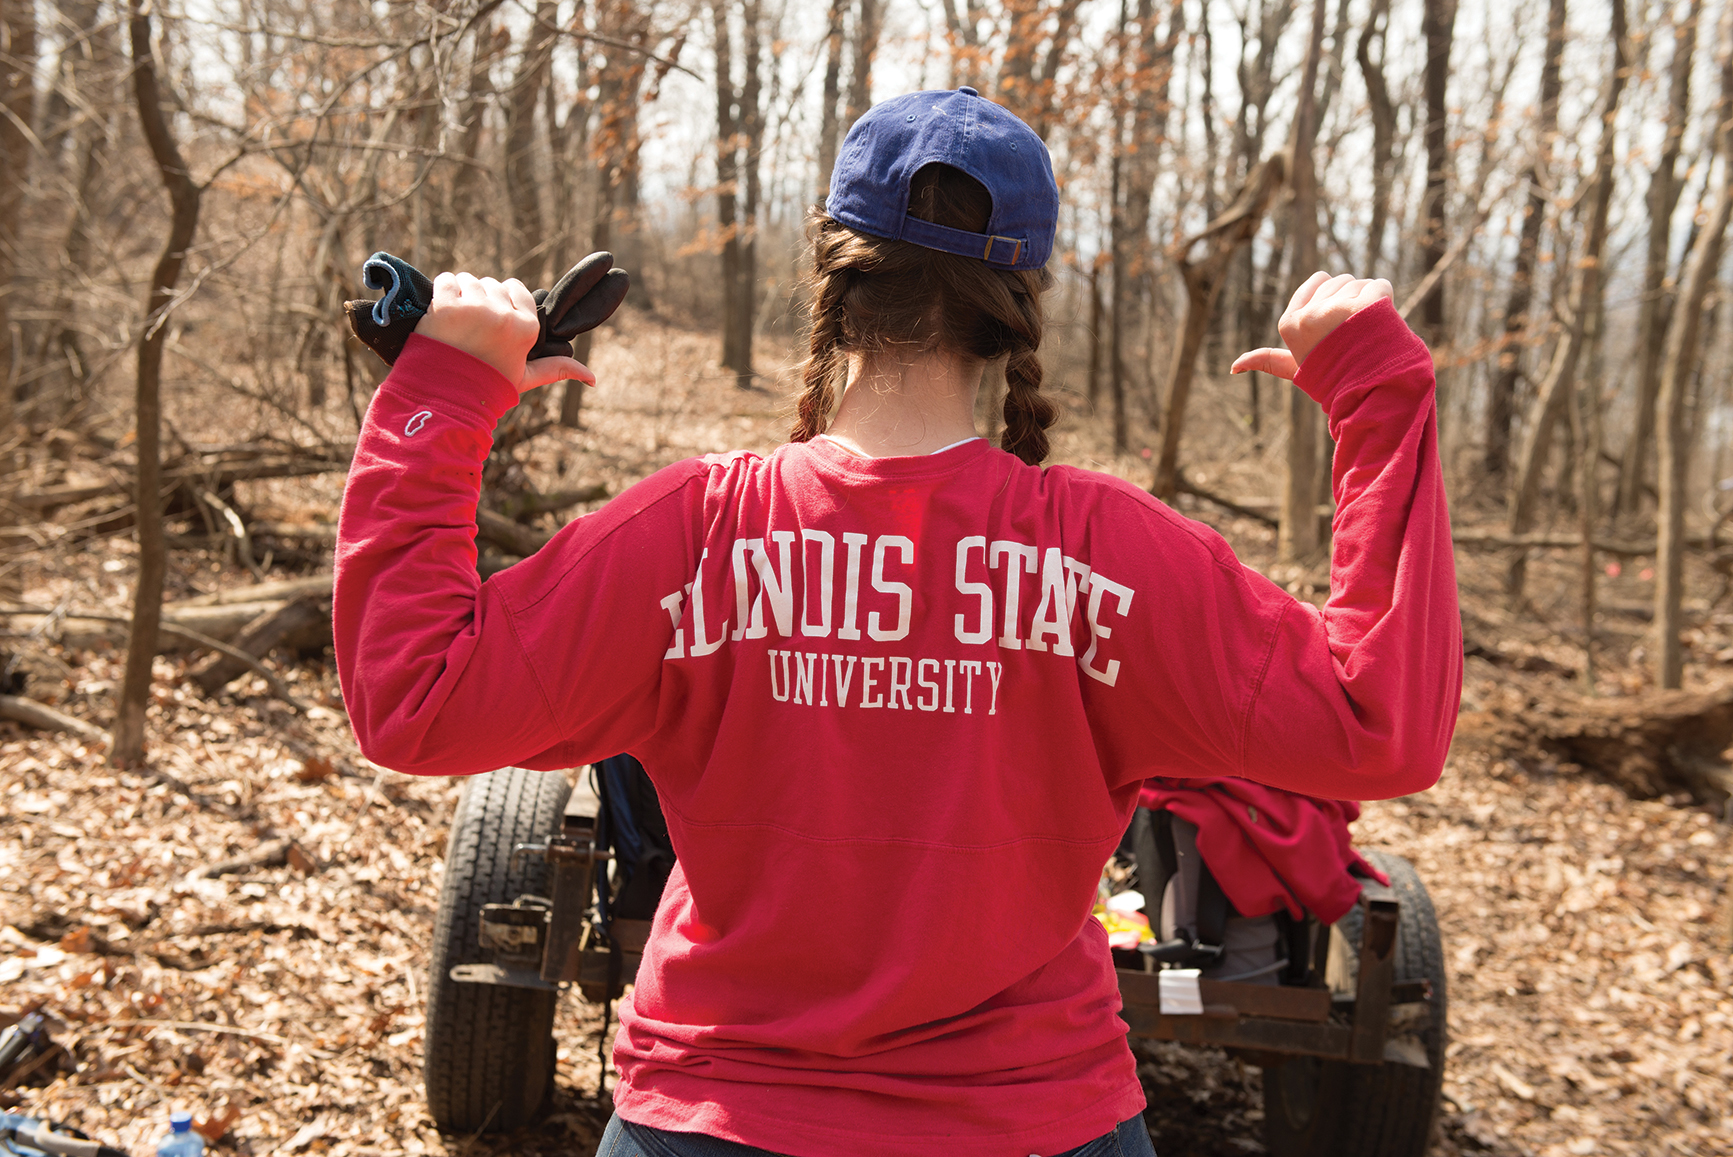 Thirty Illinois State students helped clean up the Mississippi River last spring break. Female student with back turned and Illinois State University on her shirt.